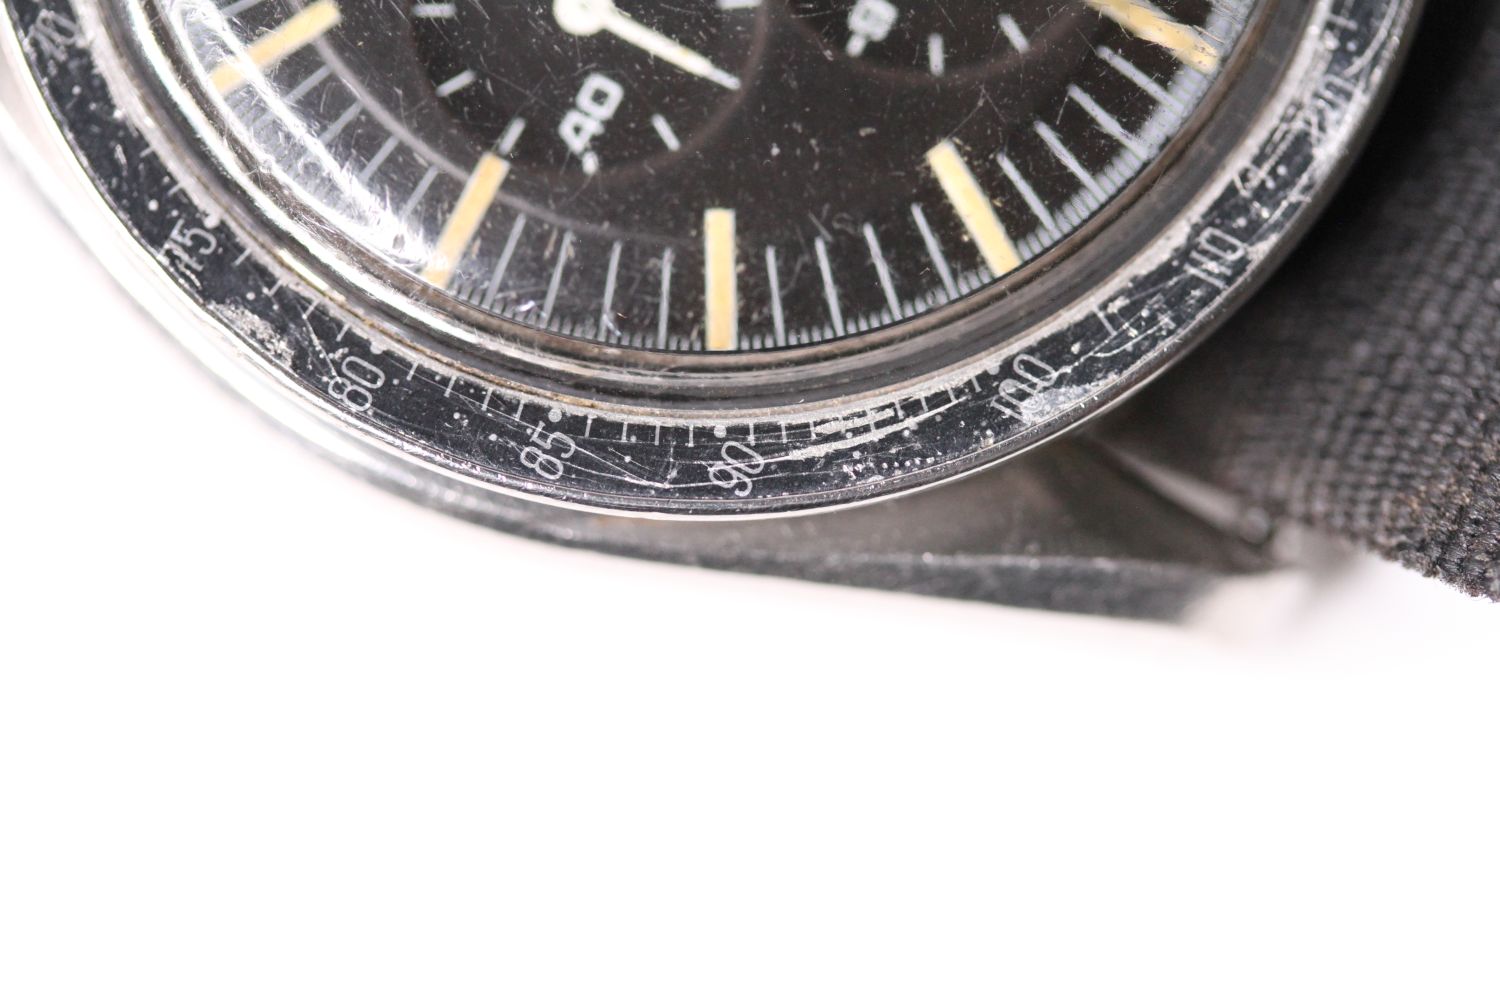 VINTAGE OMEGA SPEEDMASTER PROFESSIONAL 145.012 SP 1968, circular black dial with baton hour markers, - Image 2 of 9